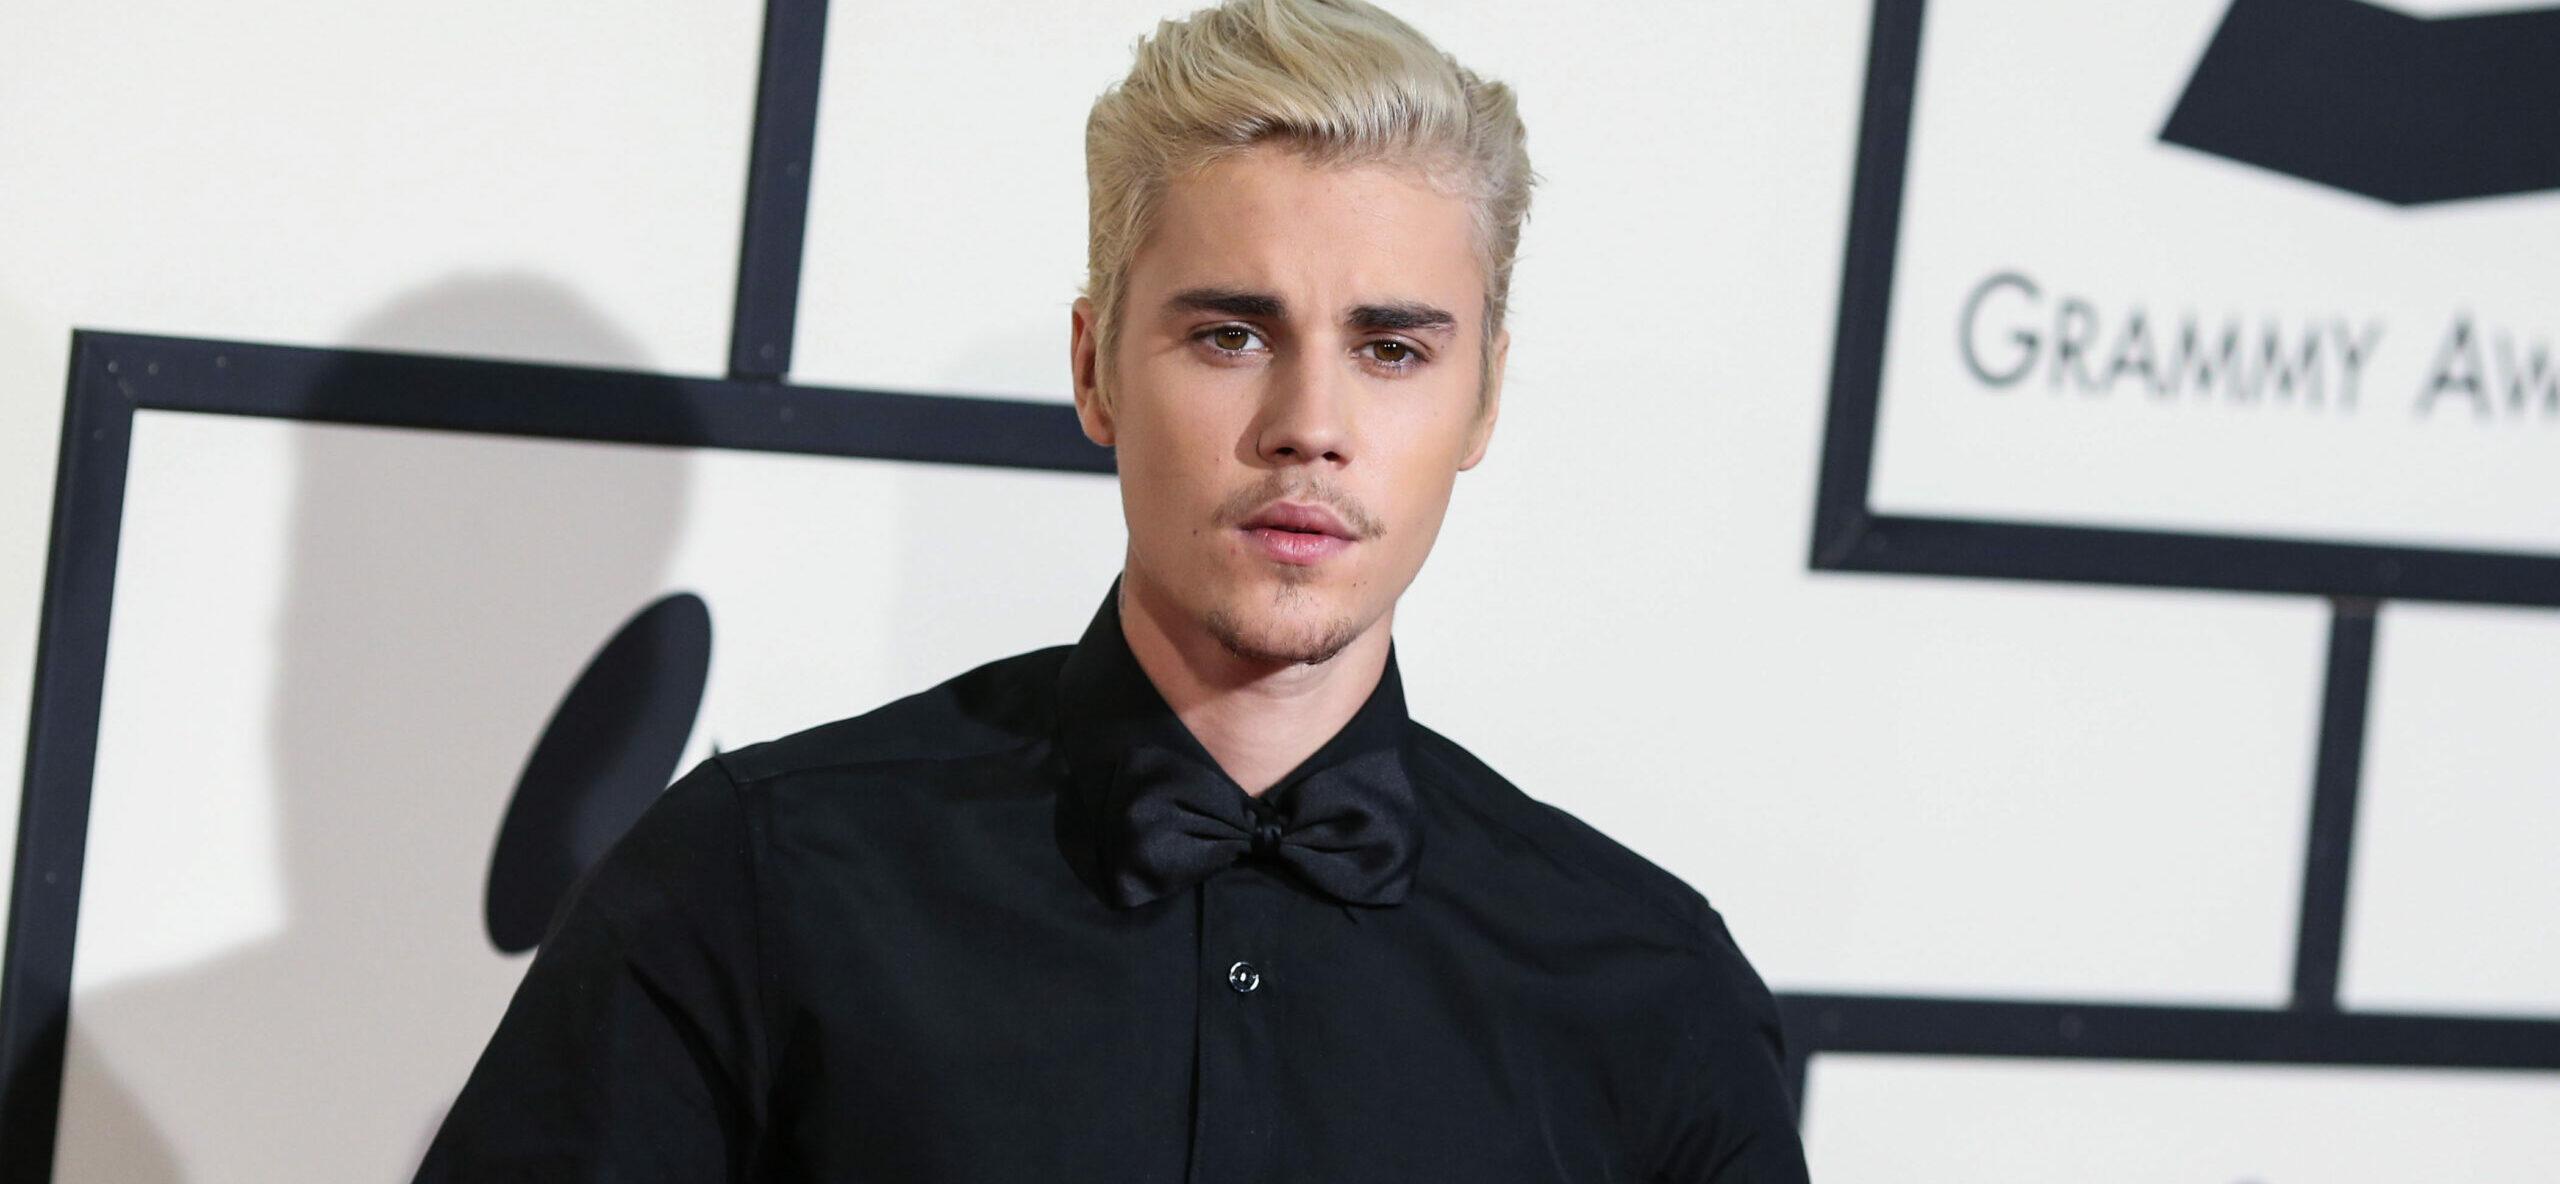 Justin Bieber’s Company Sued For $450,000 Over Car Accident